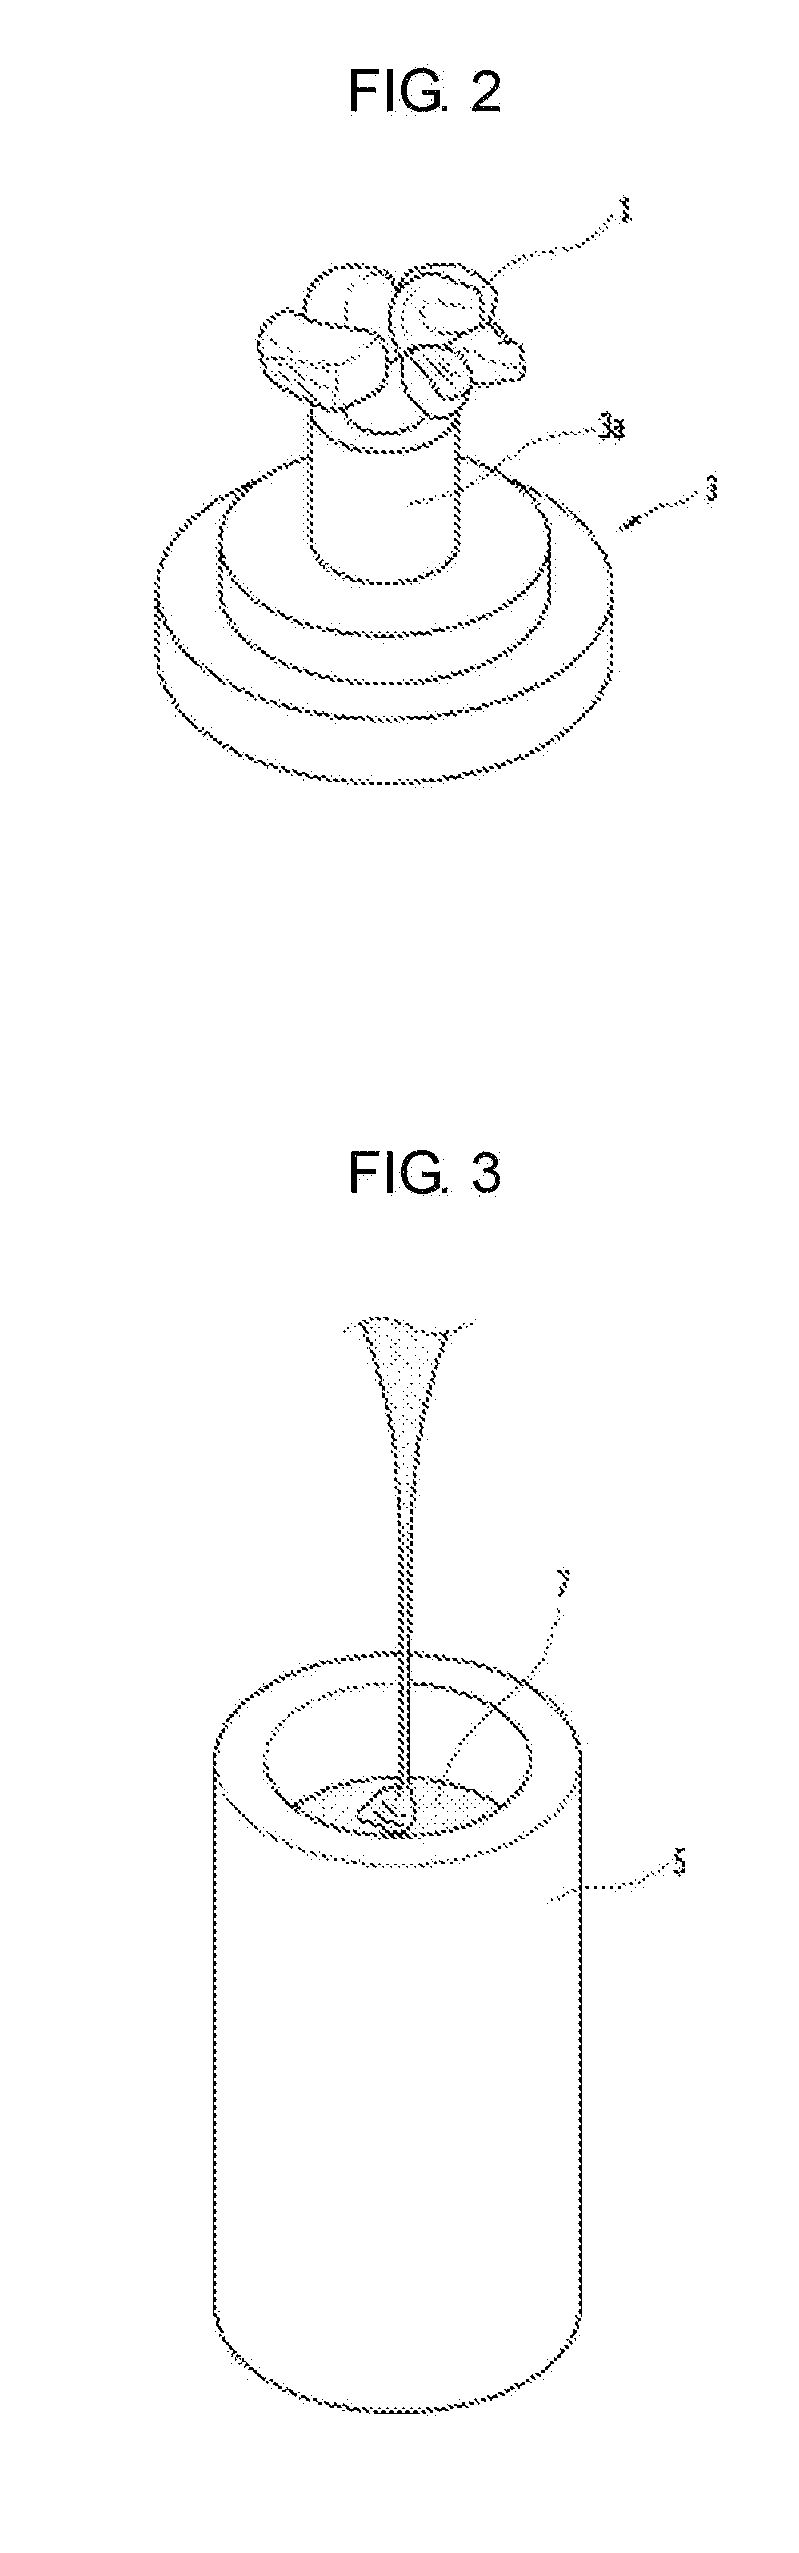 Method for preparing primary crown by using lithium disilicate, and primary crown using said preparation method